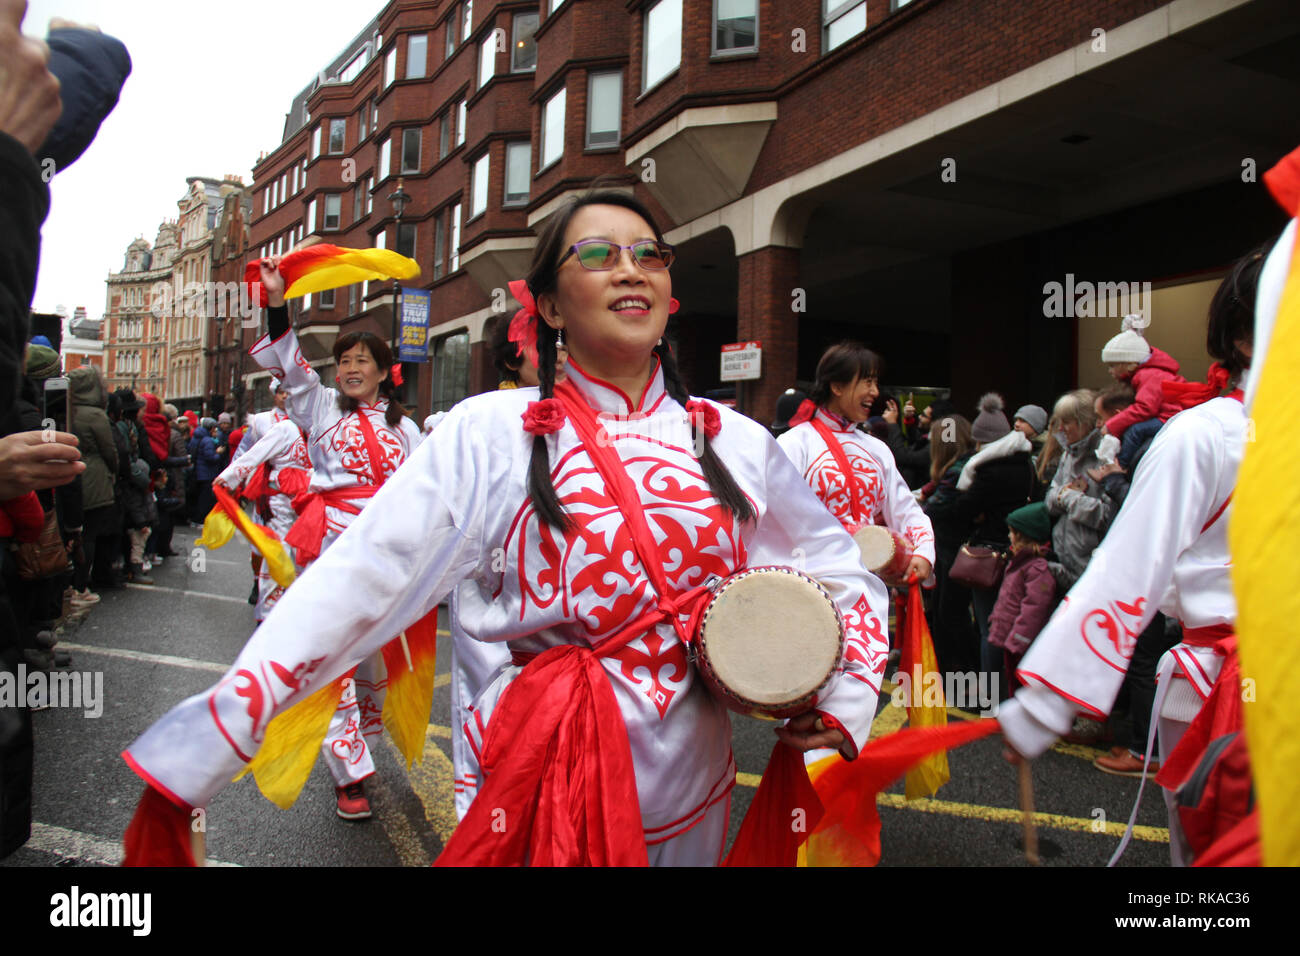 London, UK. 10th February 2019.  Hundreds of Londoners attend the Chinese New Year Celebration in Chinatown, central London to urse in the Year of the Pig. The event was organised by the London Chinatown Chinese Association (LCCA). Photo by David Mbiyu/ Alamy Live News Credit: david mbiyu/Alamy Live News Stock Photo